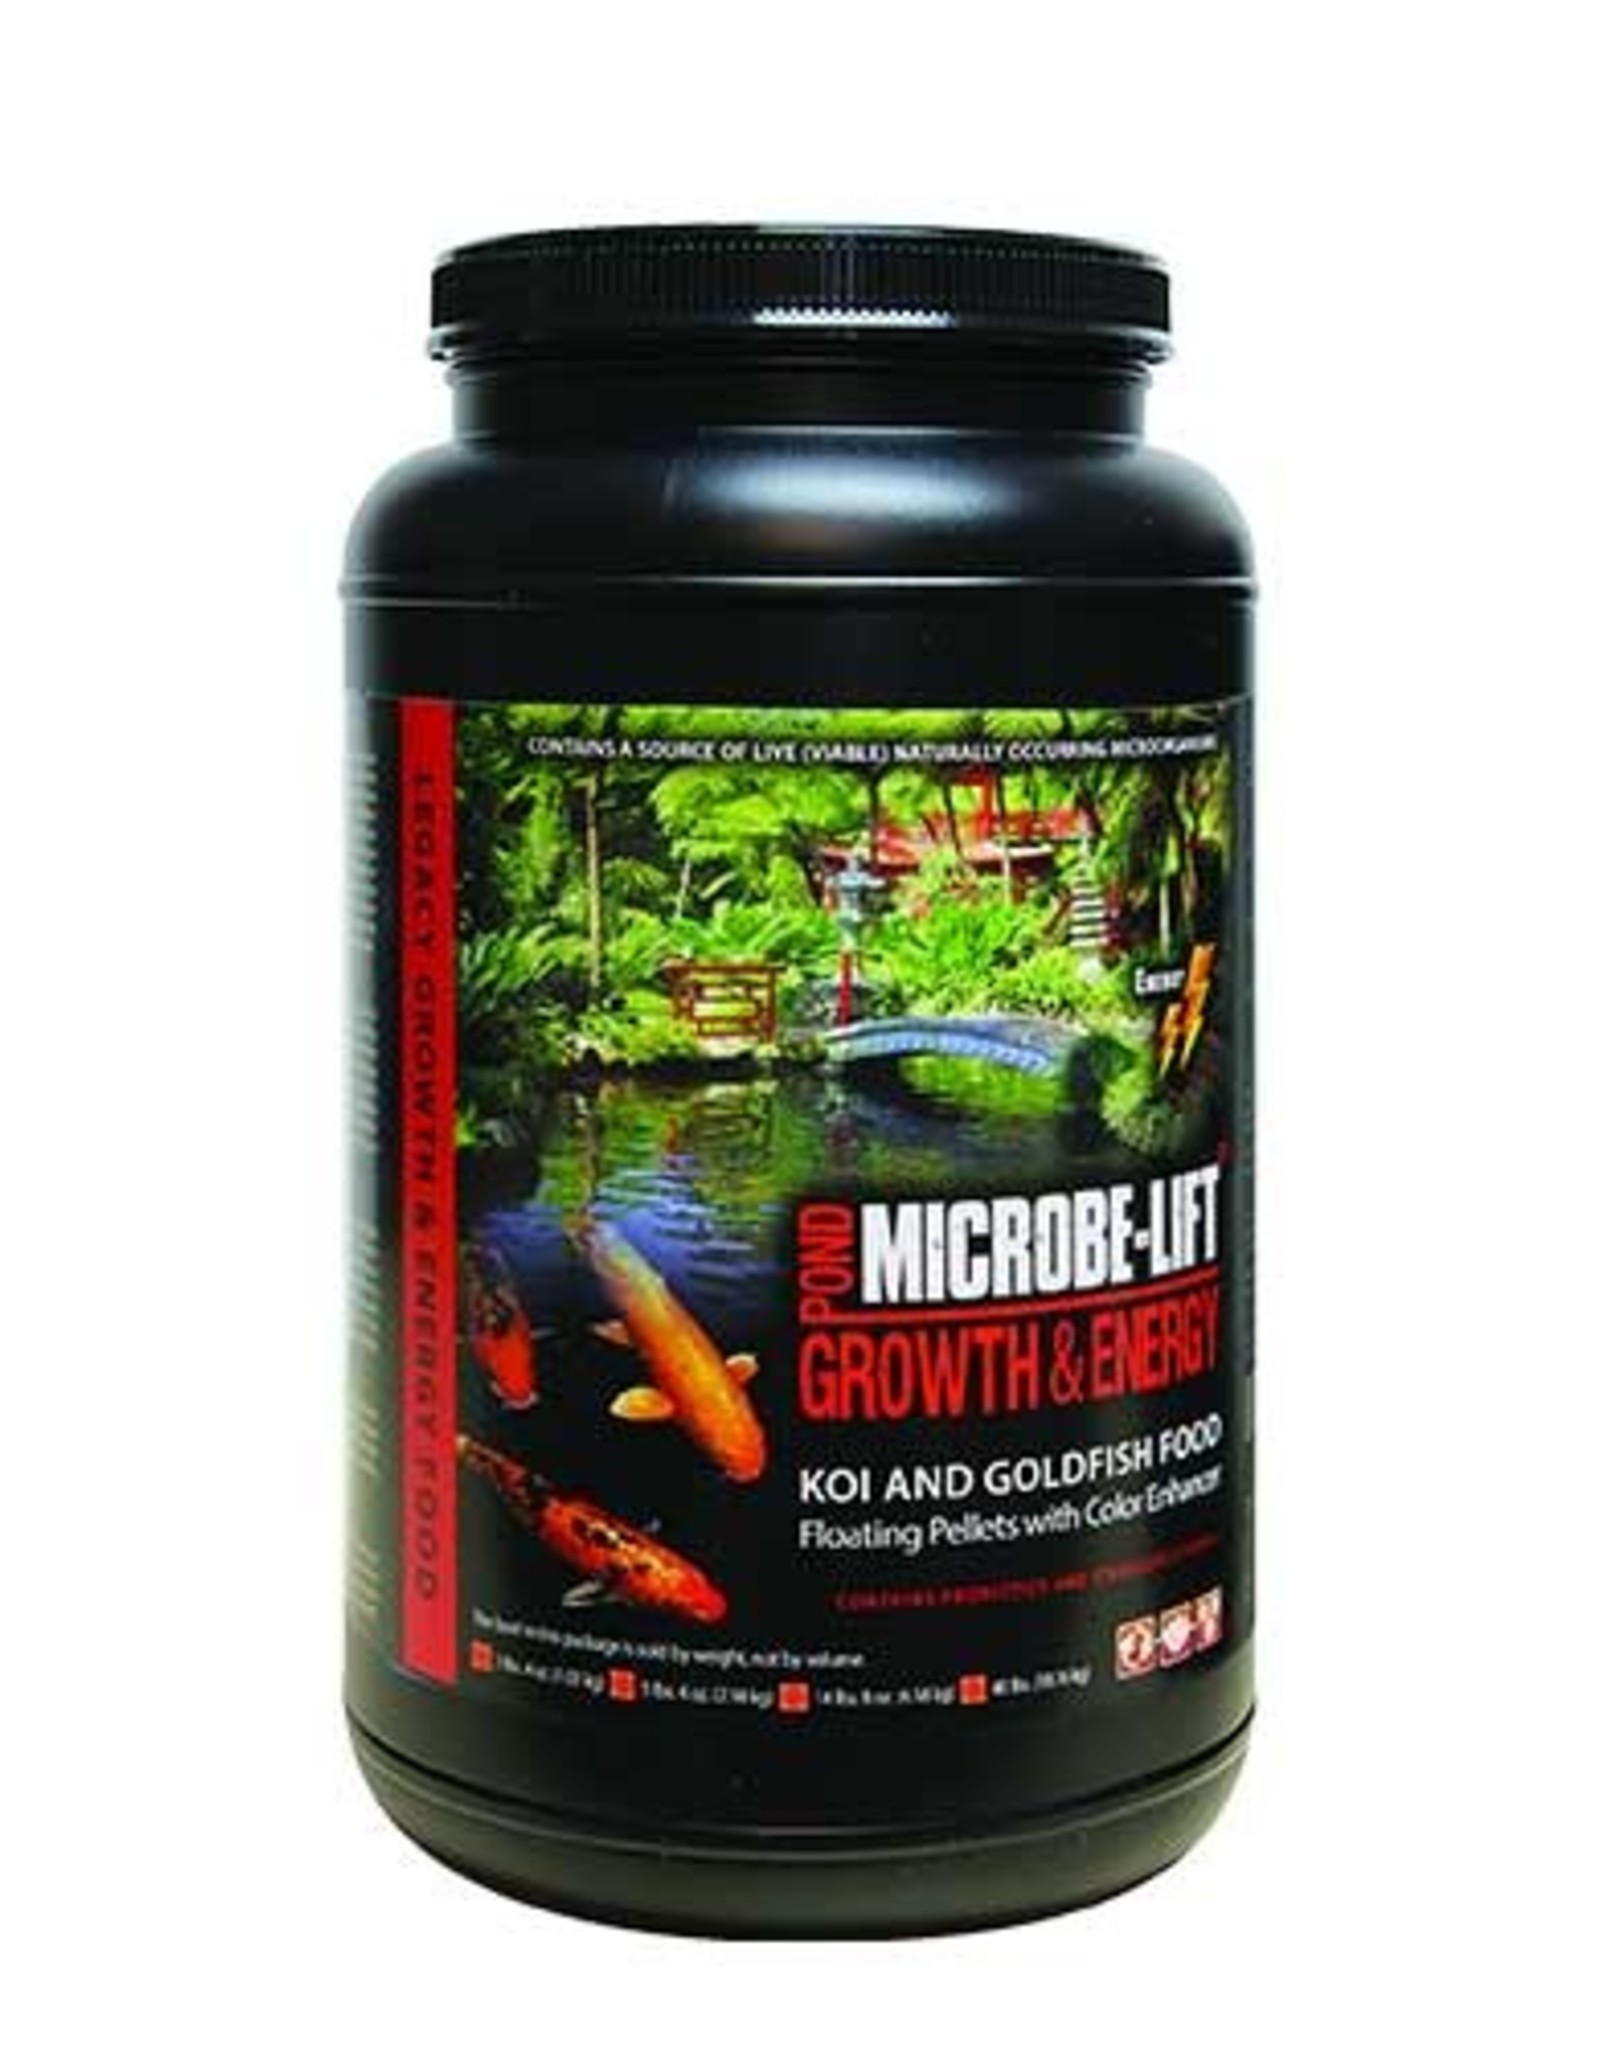 ECOLOGICAL LABS MICROBE LIFT GROWTH & ENERGY 2 LB 4 0Z